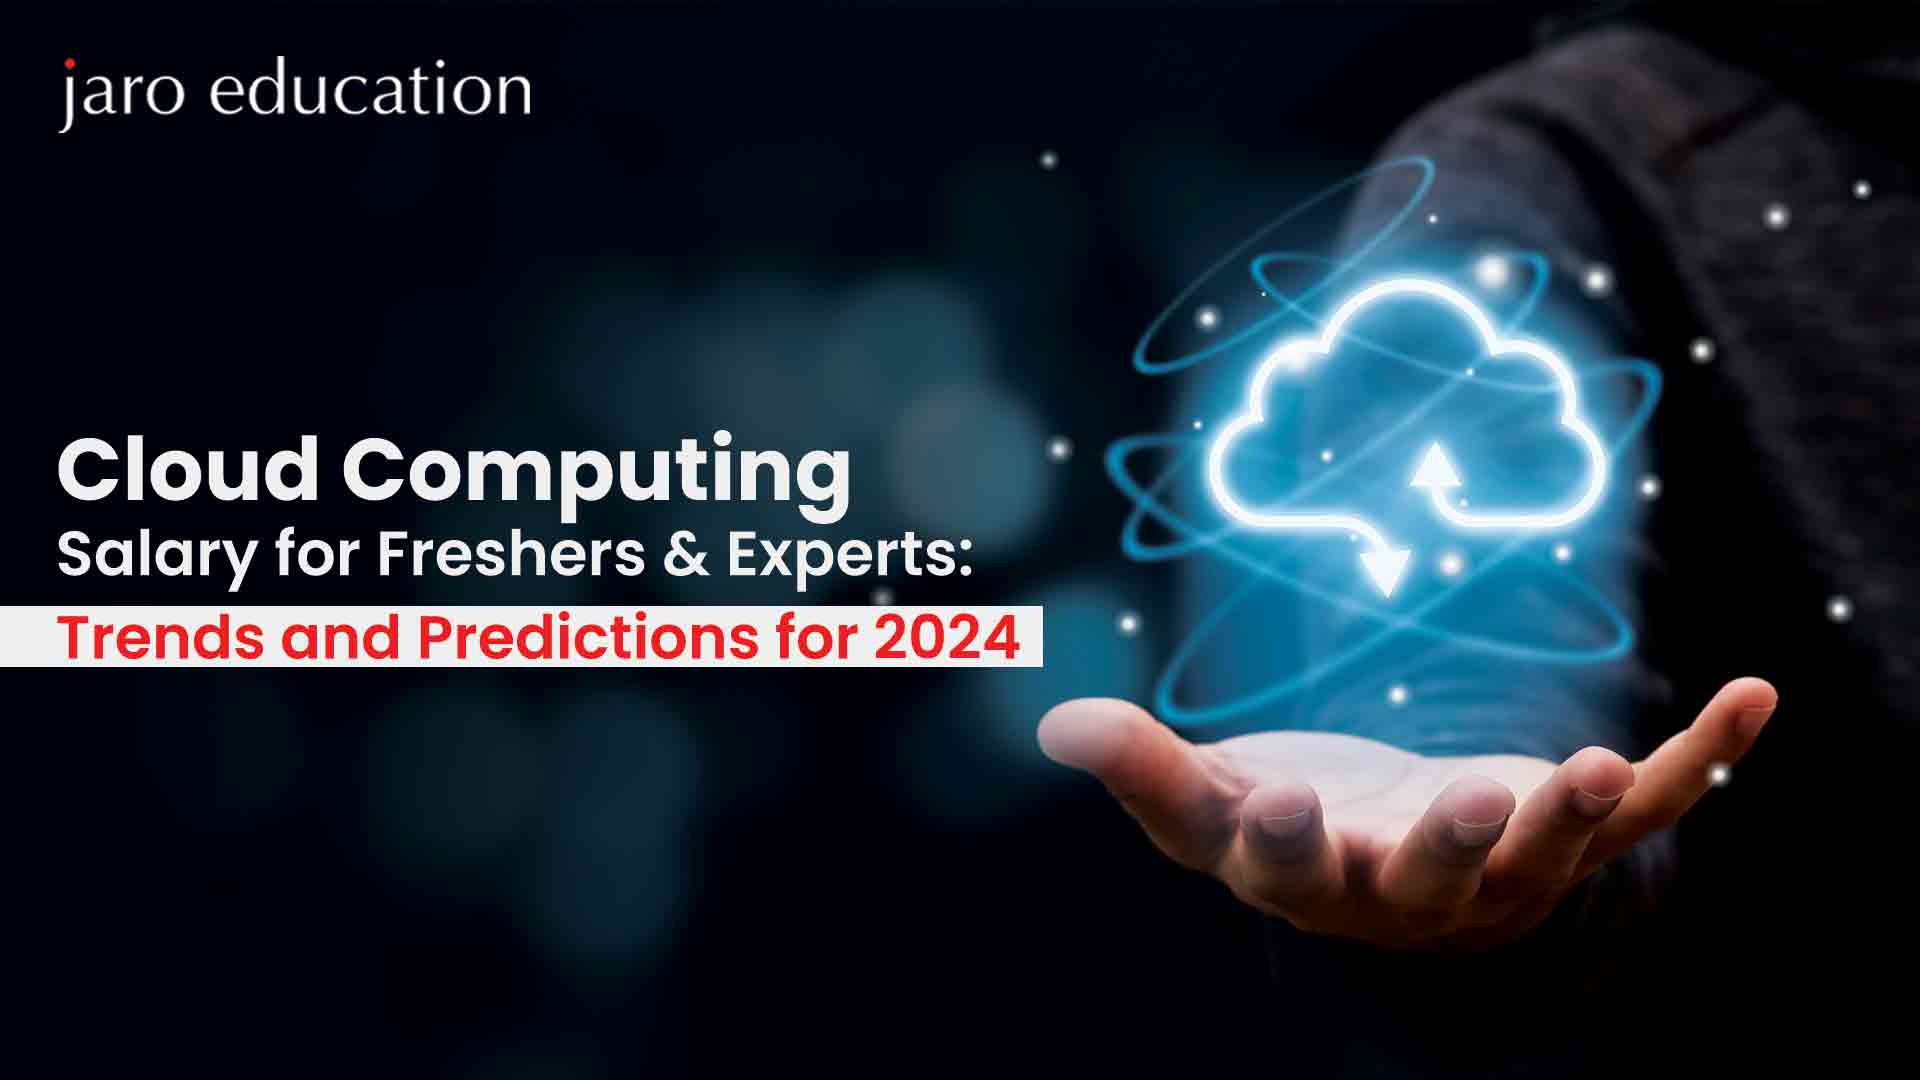 Cloud Computing Salary for Freshers & Experts Trends and Predictions for 2024